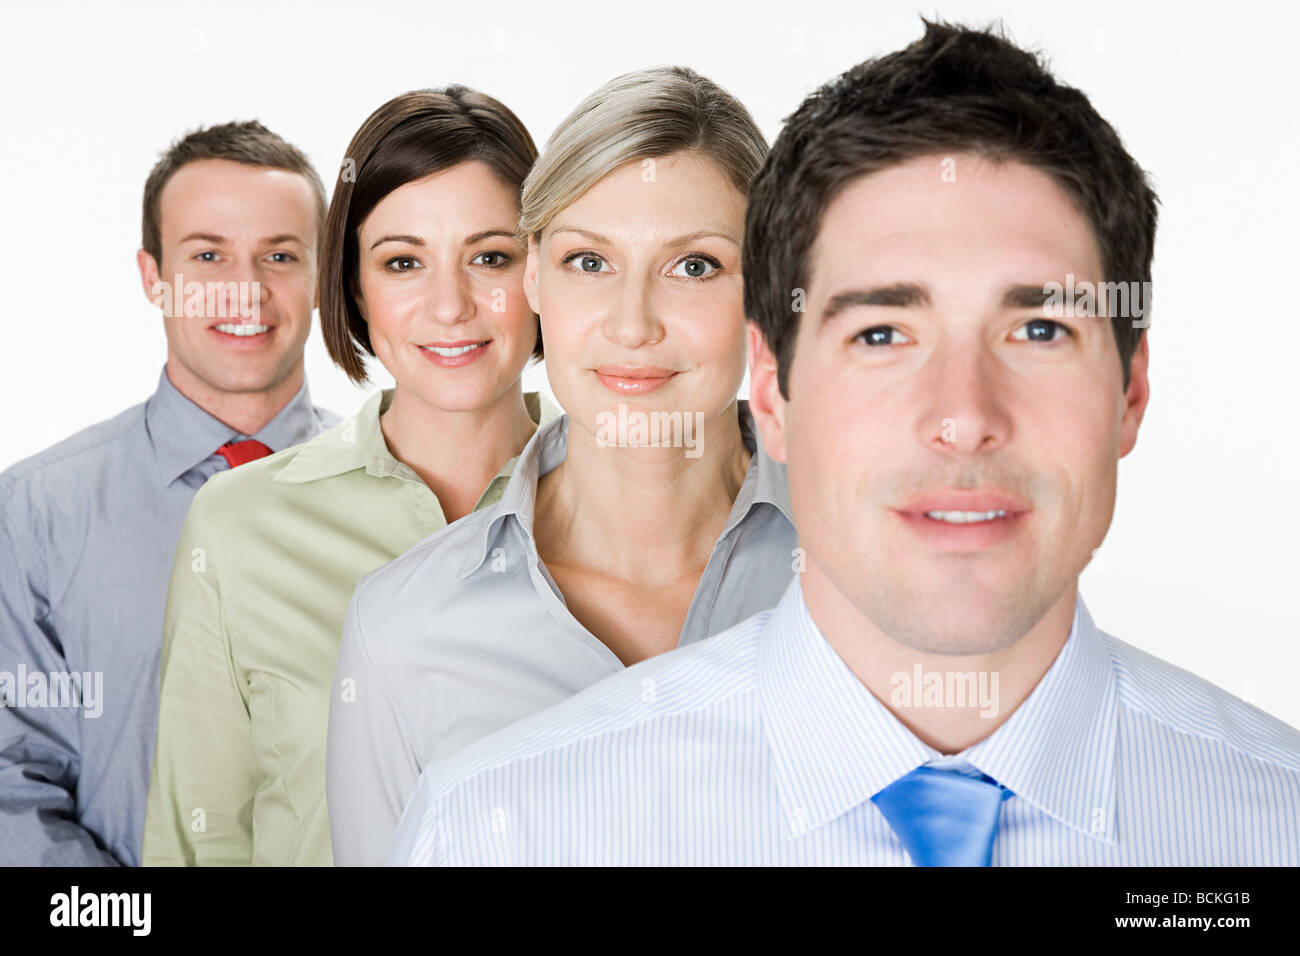 Colleagues in a row Stock Photo